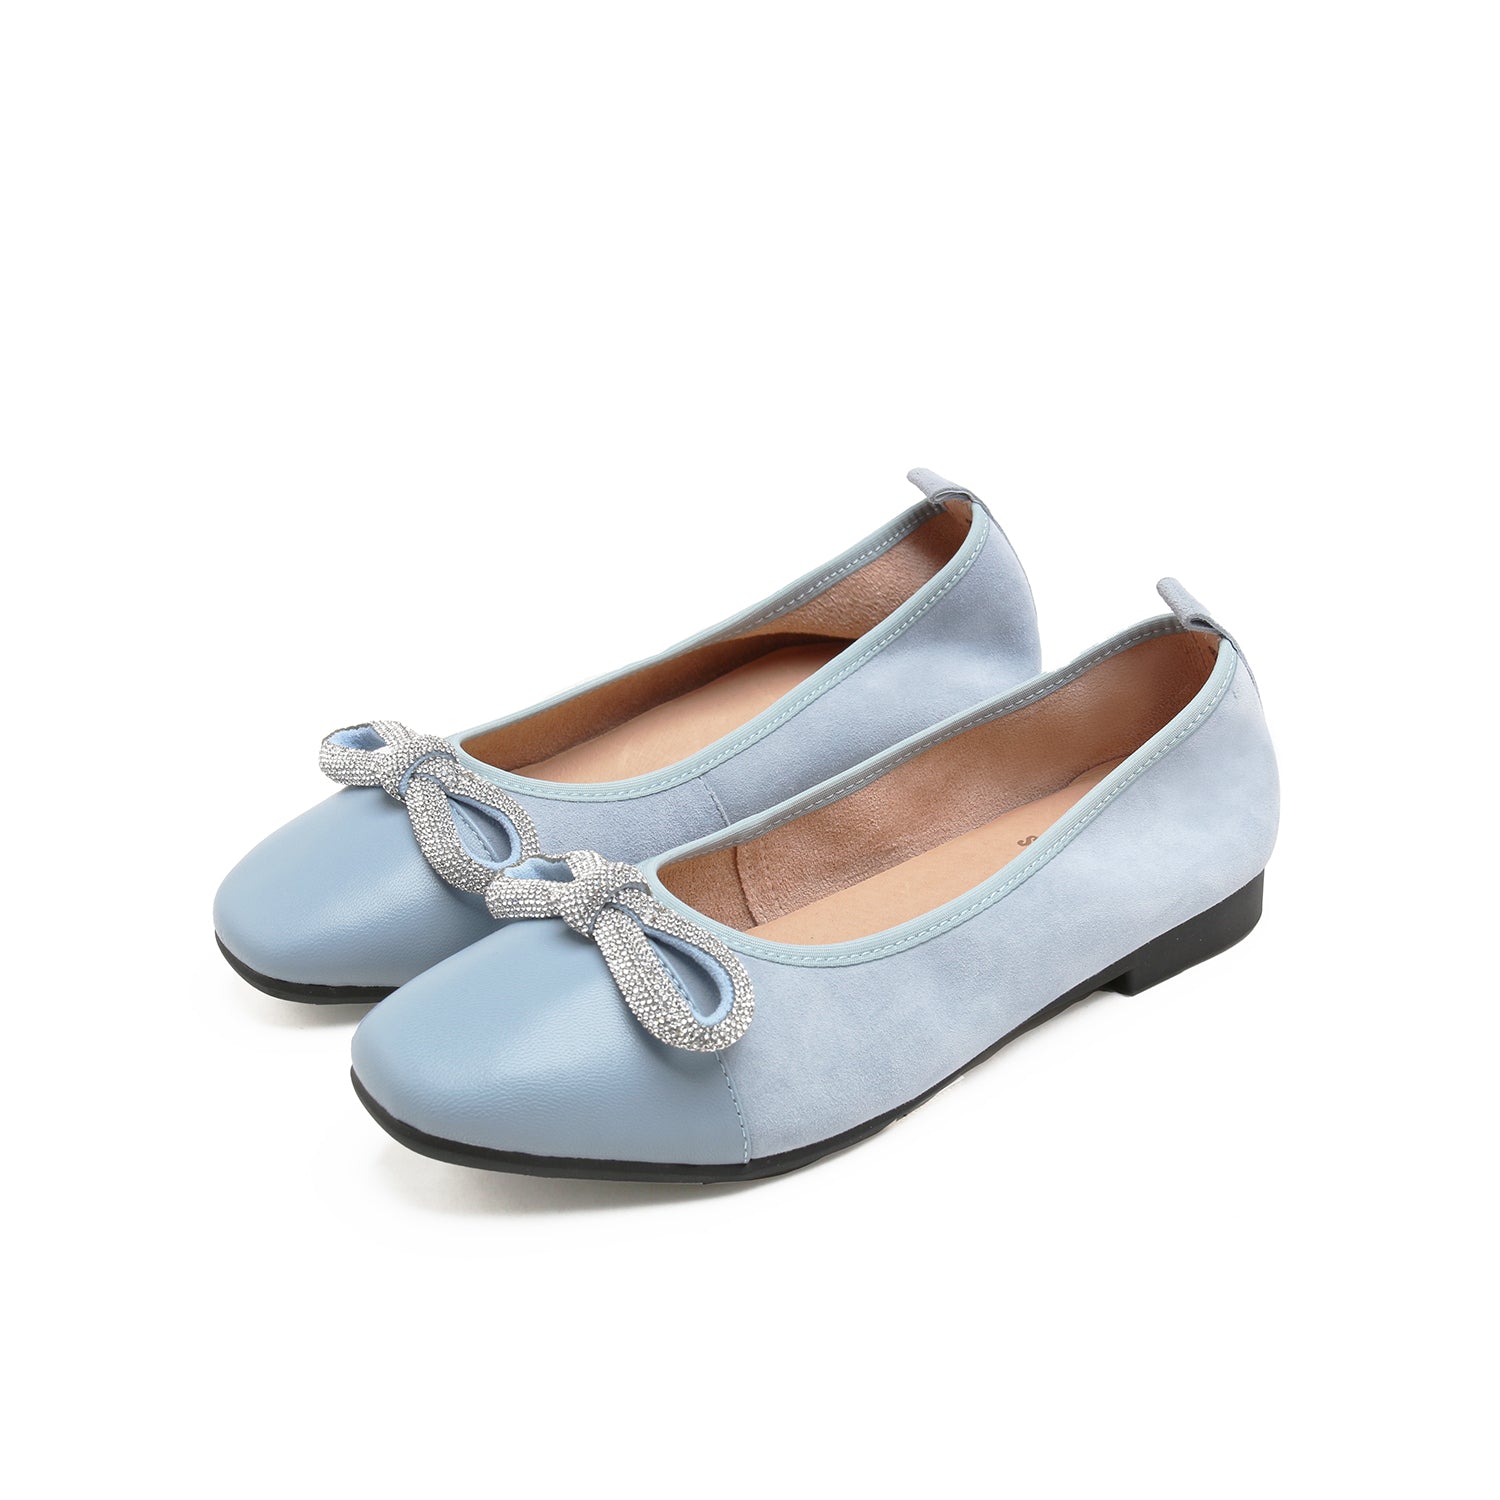 Blue Crystal Bow Suede Ballerina Flats